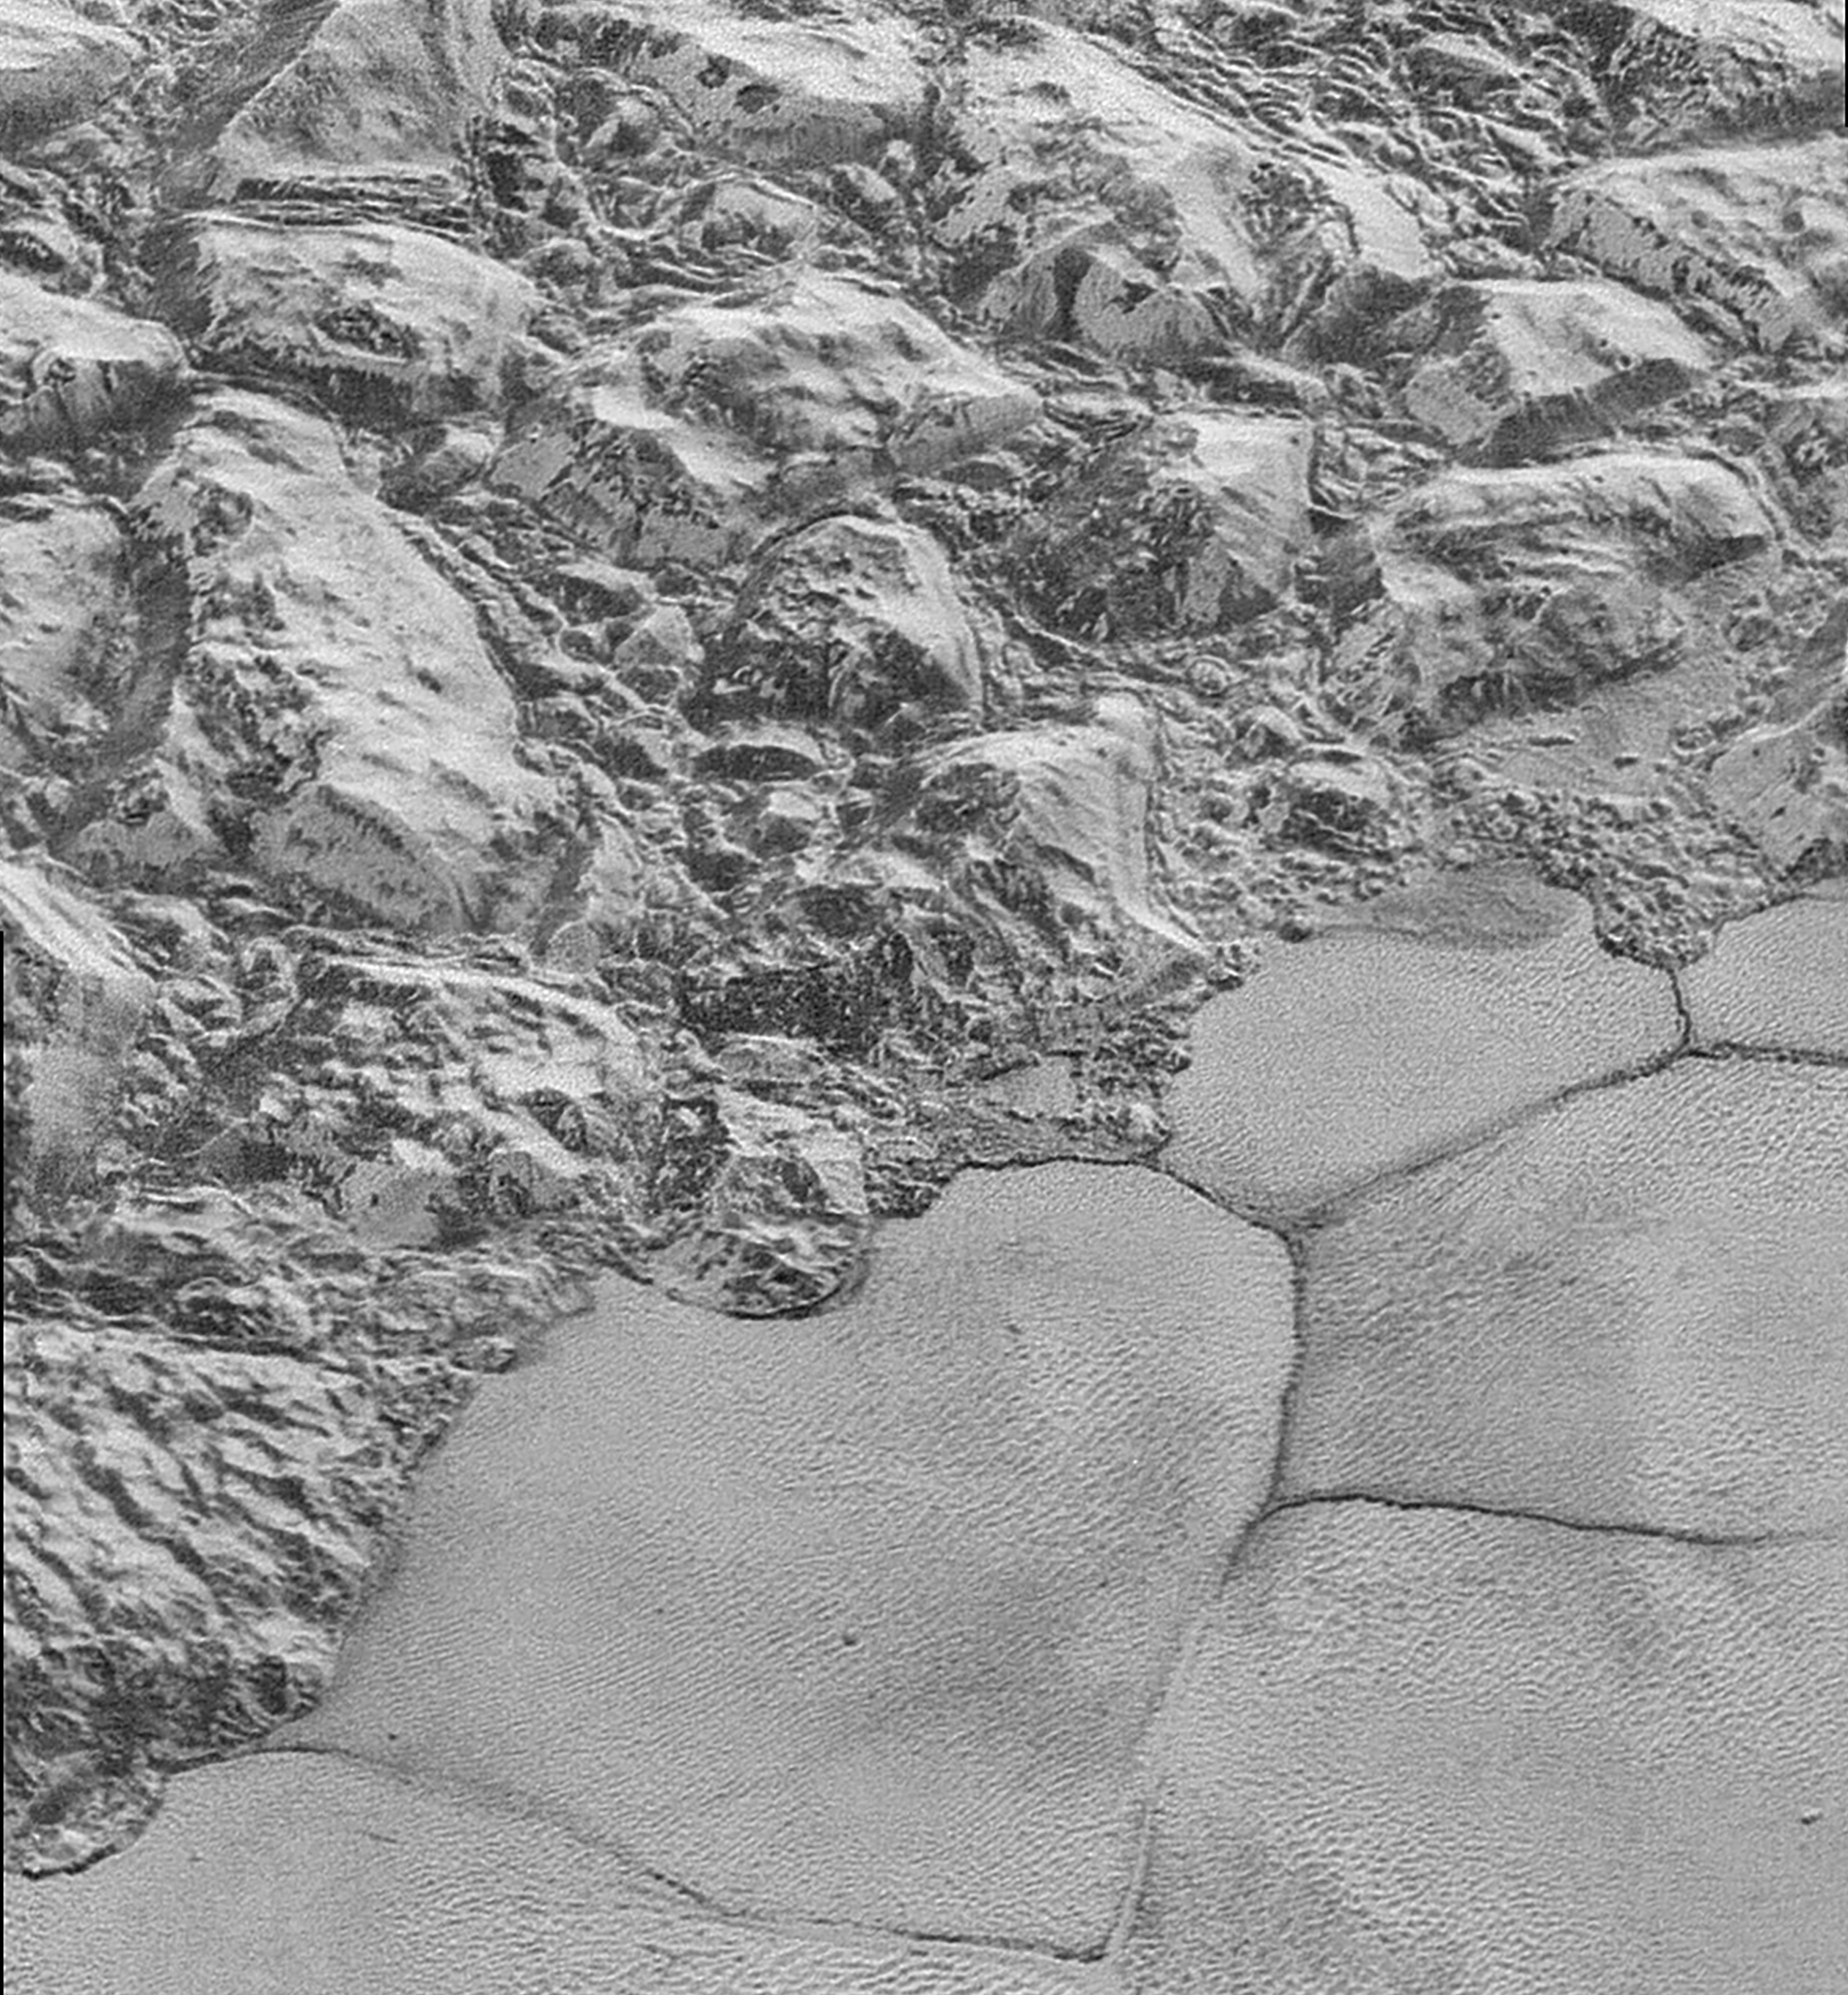 The Mountainous Shoreline of Sputnik Planum: In this highest-resolution image from NASA’s New Horizons spacecraft, great blocks of Pluto’s water-ice crust appear jammed together in the informally named al-Idrisi mountains. "The mountains bordering Sputnik Planum are absolutely stunning at this resolution," said New Horizons science team member John Spencer of the Southwest Research Institute. "The new details revealed here, particularly the crumpled ridges in the rubbly material surrounding several of the mountains, reinforce our earlier impression that the mountains are huge ice blocks that have been jostled and tumbled and somehow transported to their present locations." Credits: NASA/JHUAPL/SwRI